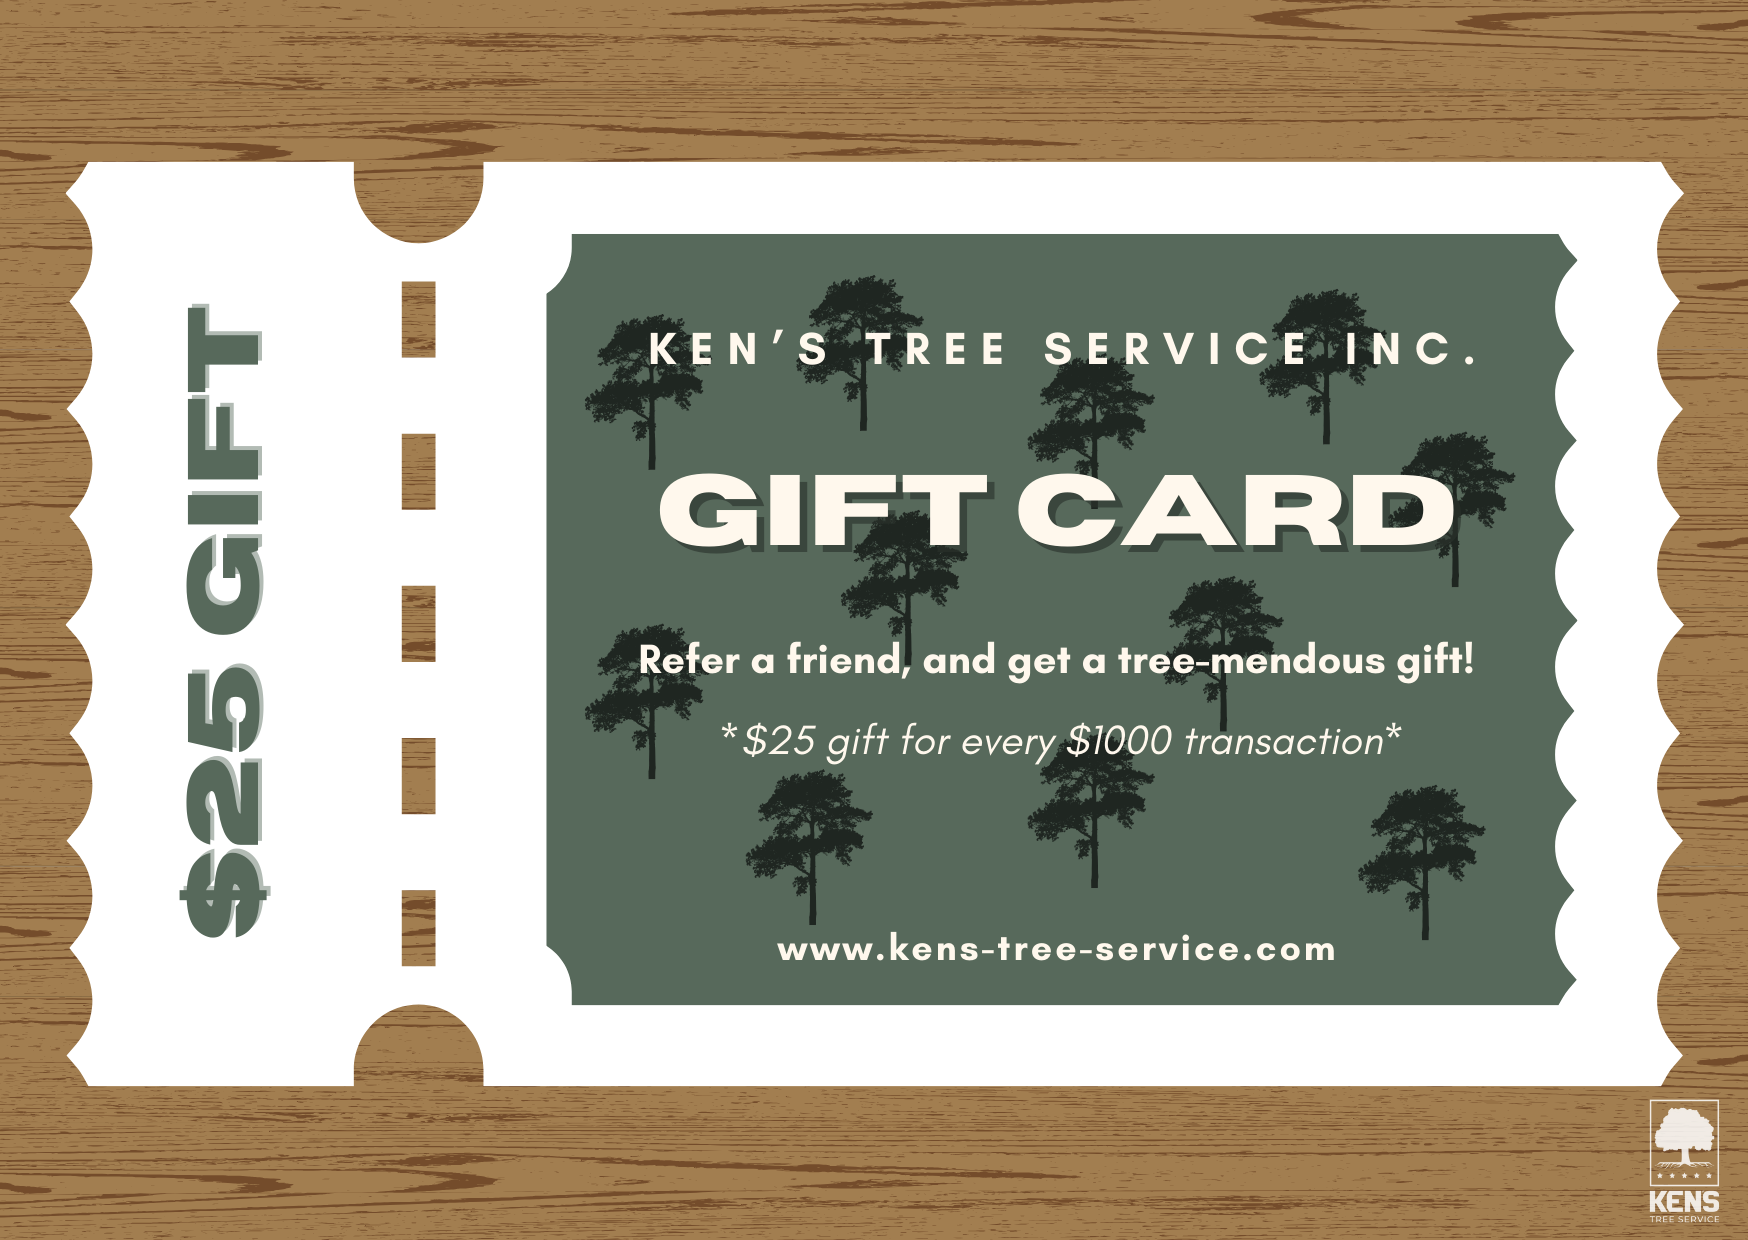 Copy of KTS gift card